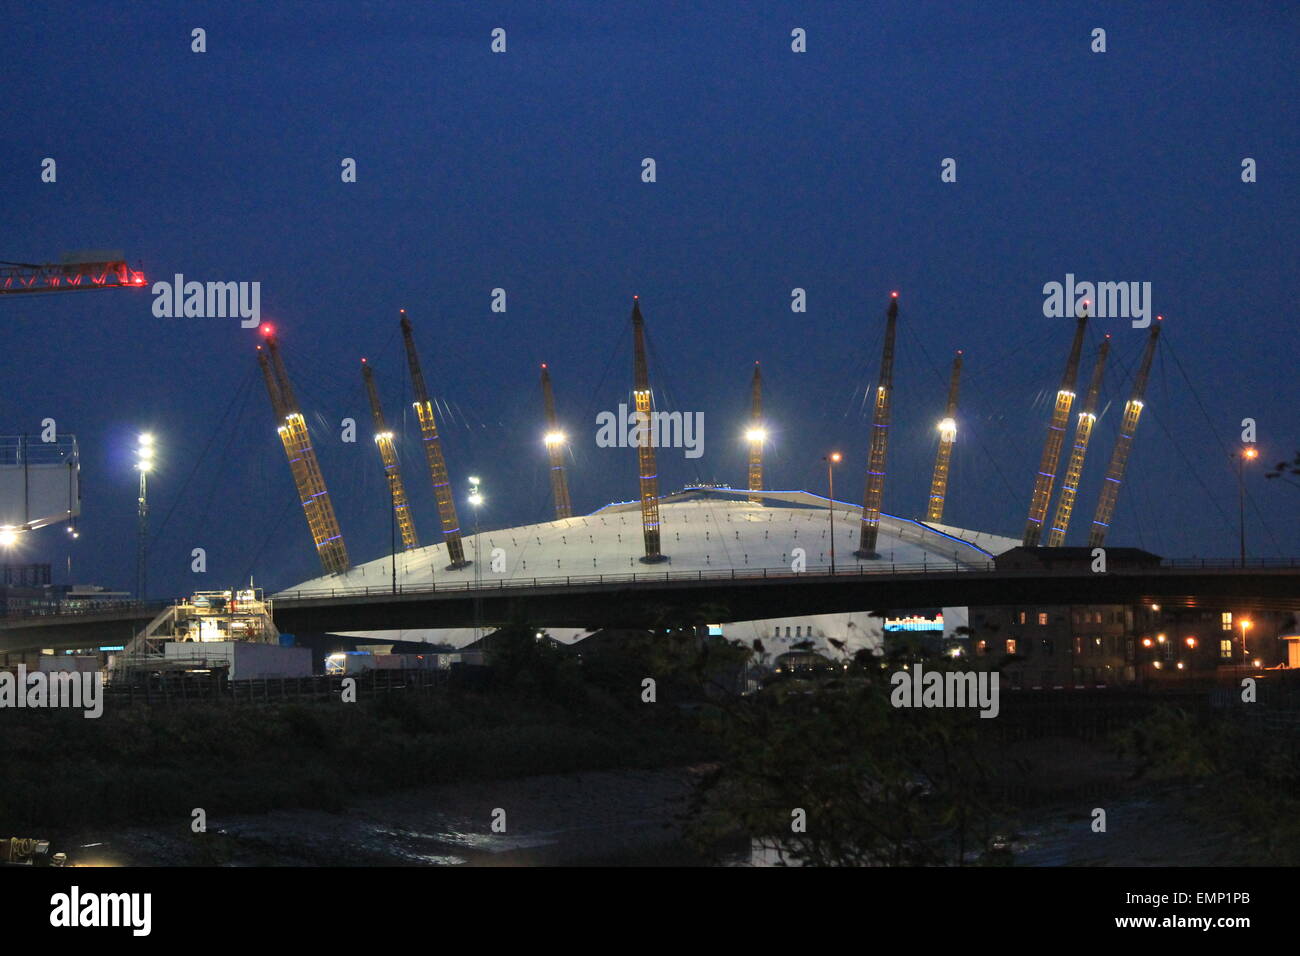 millenium, dome, 02, arena, London, Greenwich, at night 02, architecture, arena, banks, bend, boat, britain, british, cables, Stock Photo